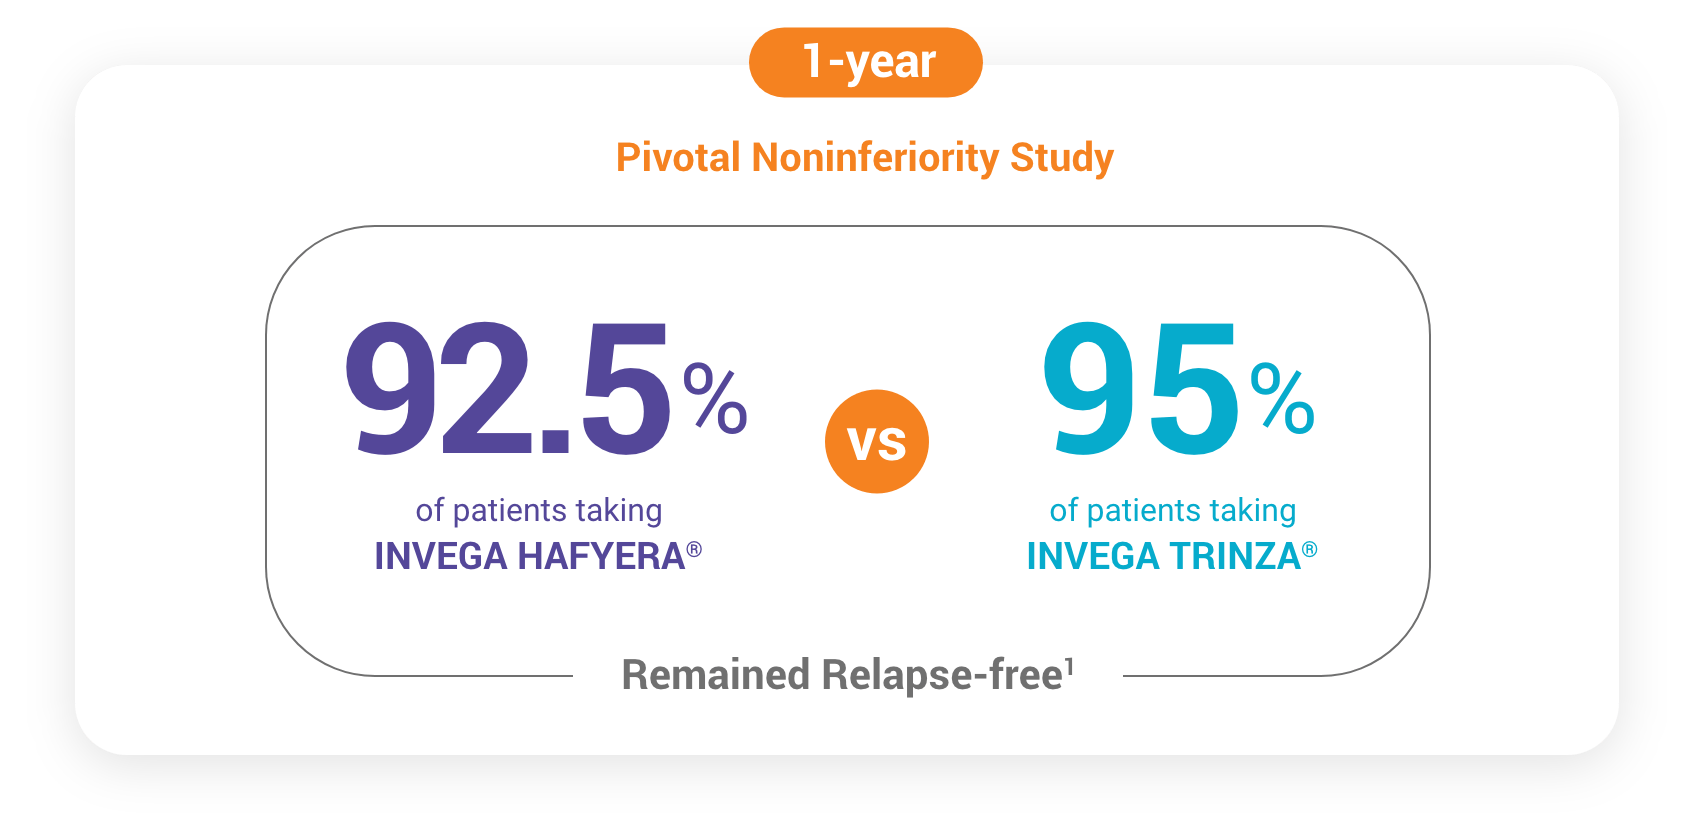 1-year pivotal noninferiority study: 92.5% of patients taking INVEGA HAFYERA™ remained relapse-free